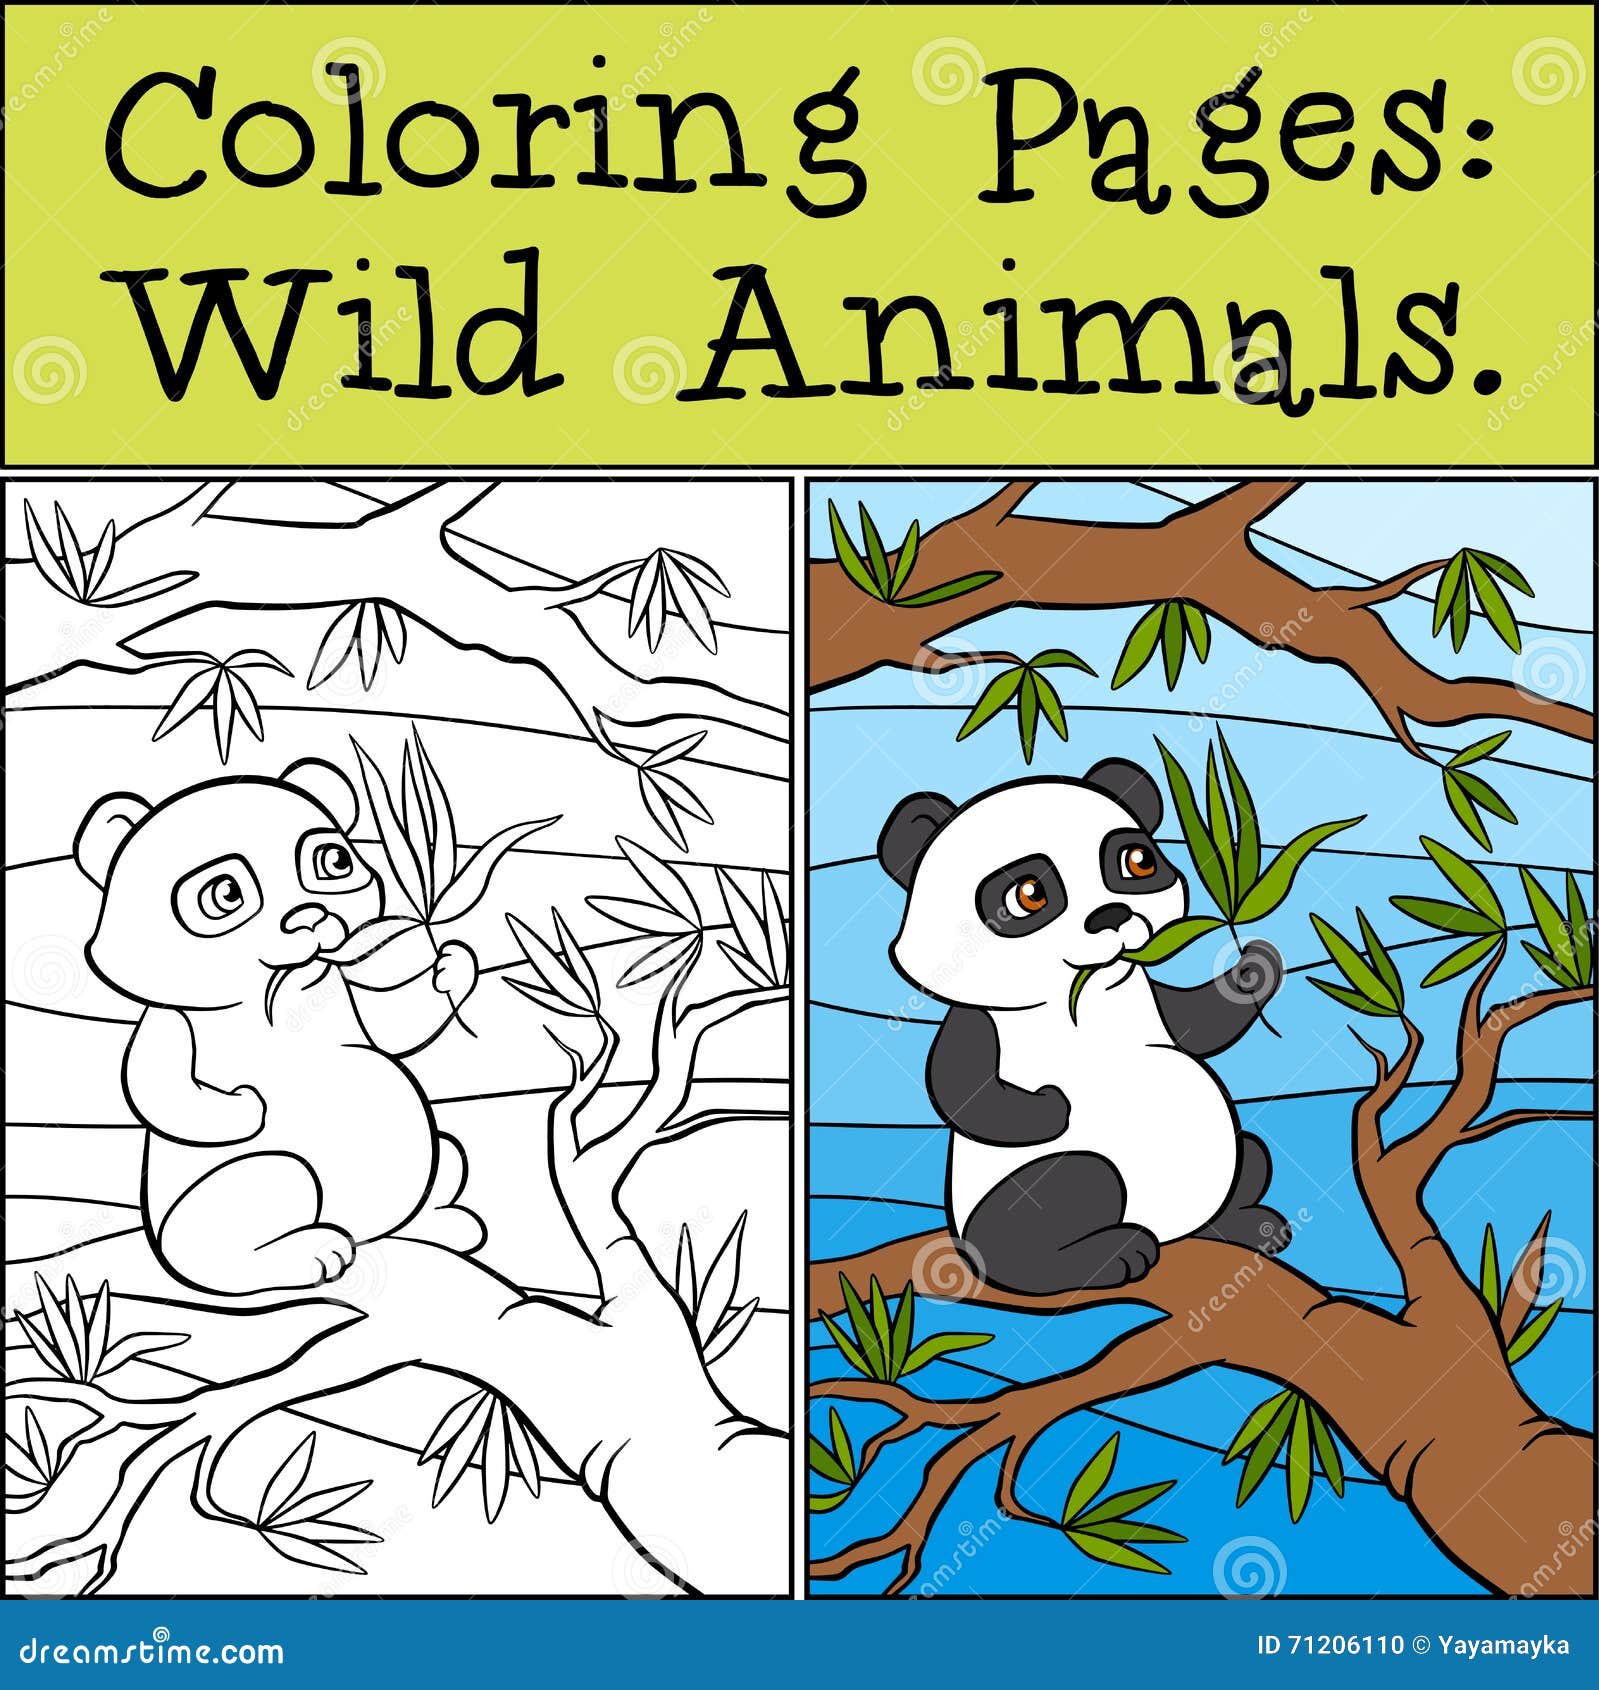 coloring pages: wild animals. little cute panda.